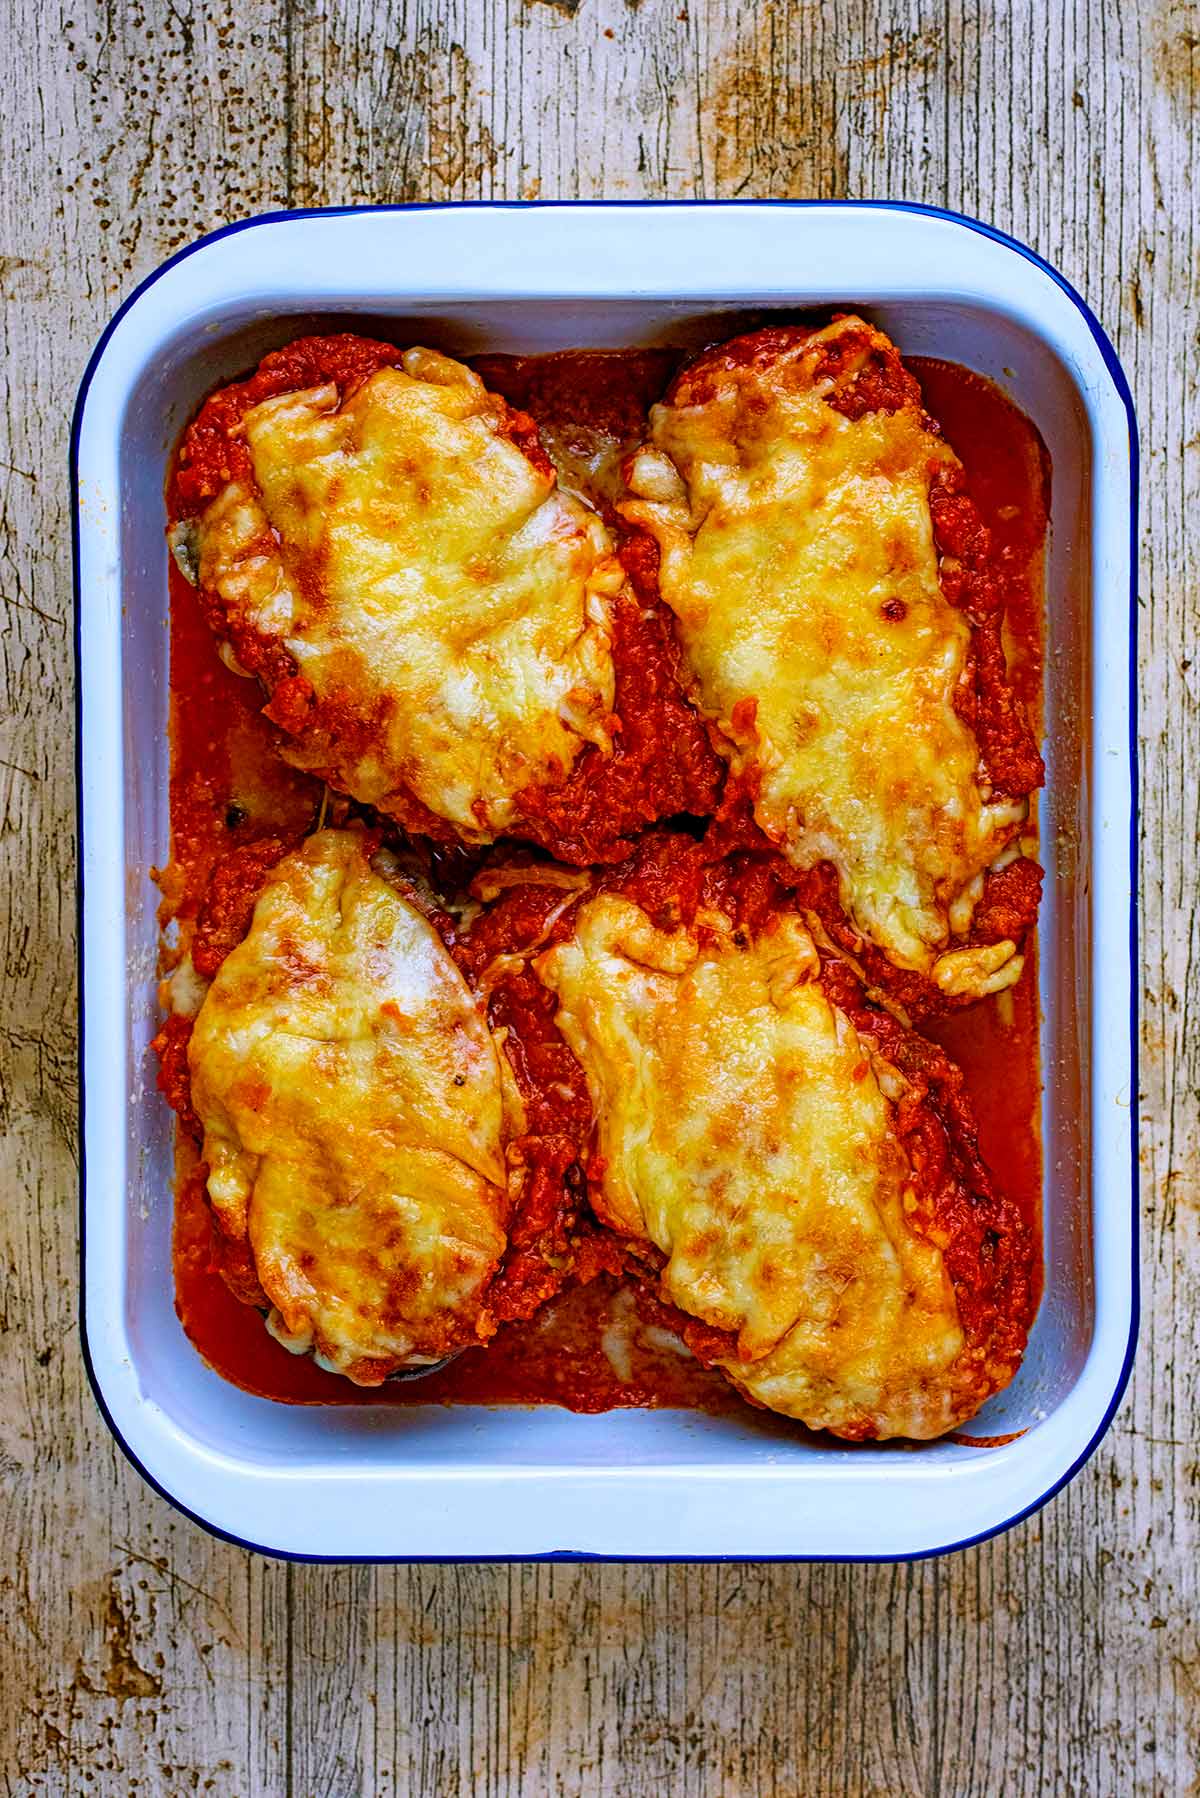 Four cooked aubergine halves covered in sauce and melted cheese.